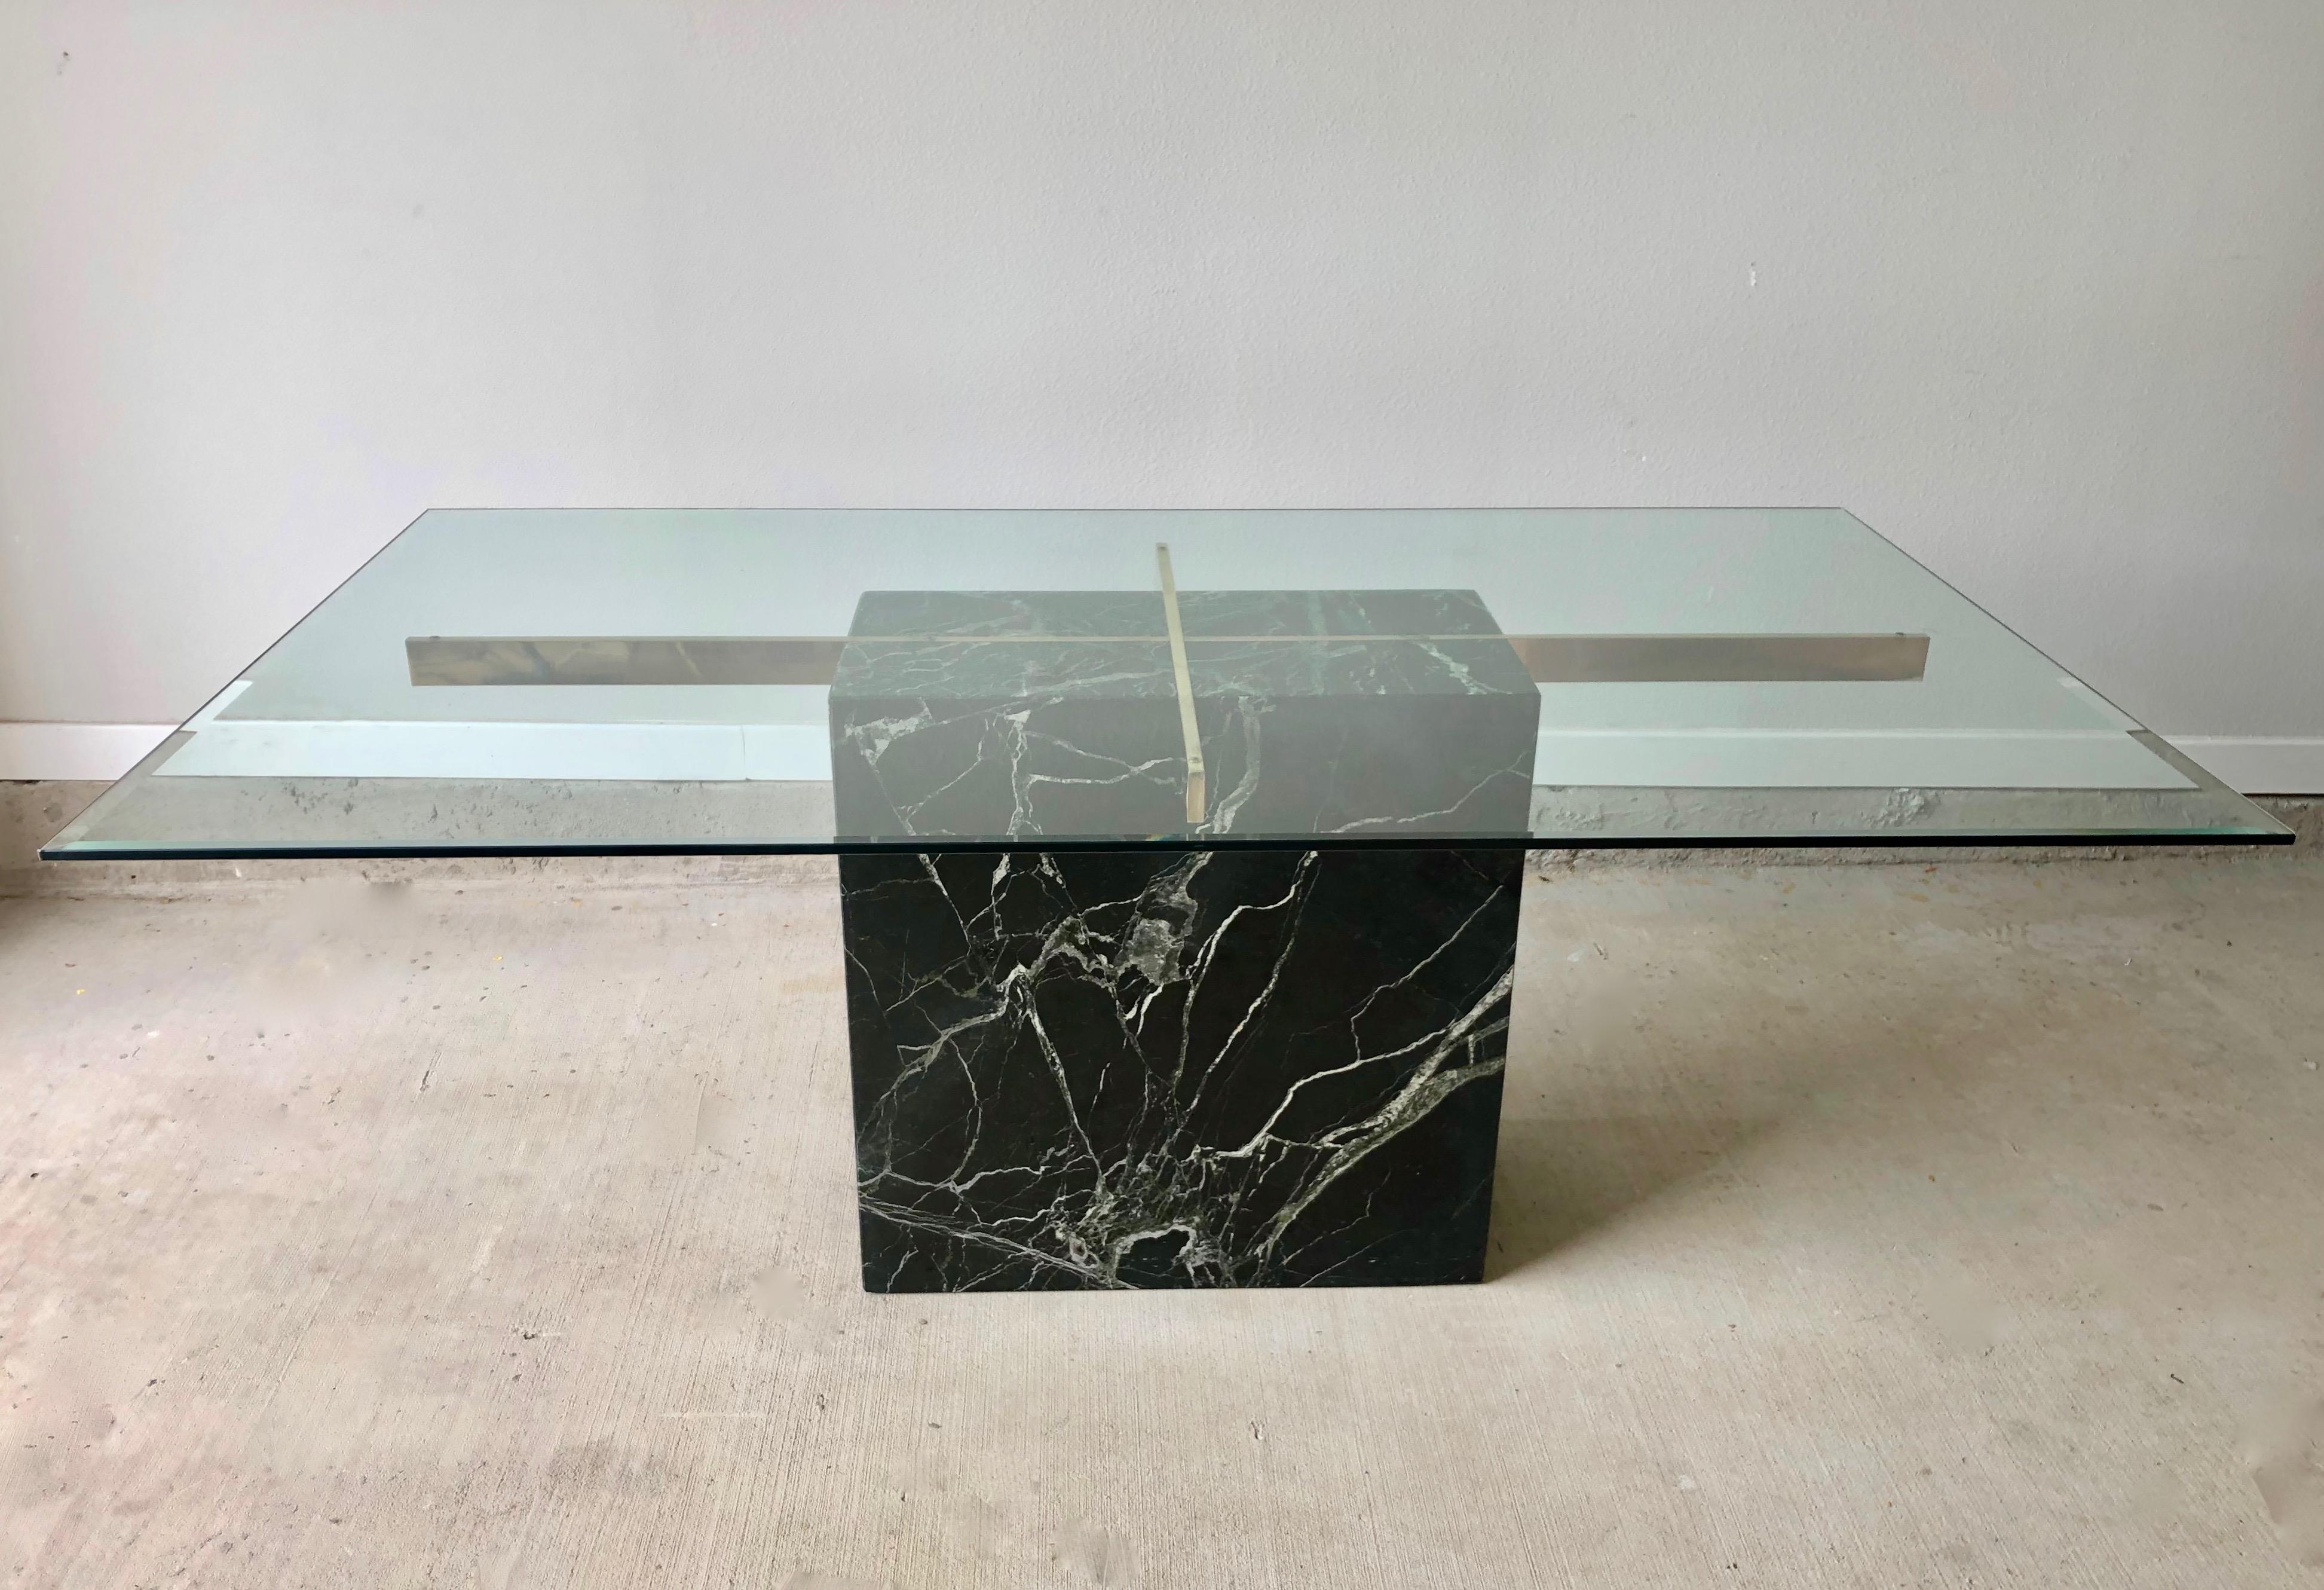 Black marble and brass base with a beveled glass top Artedi dining table.